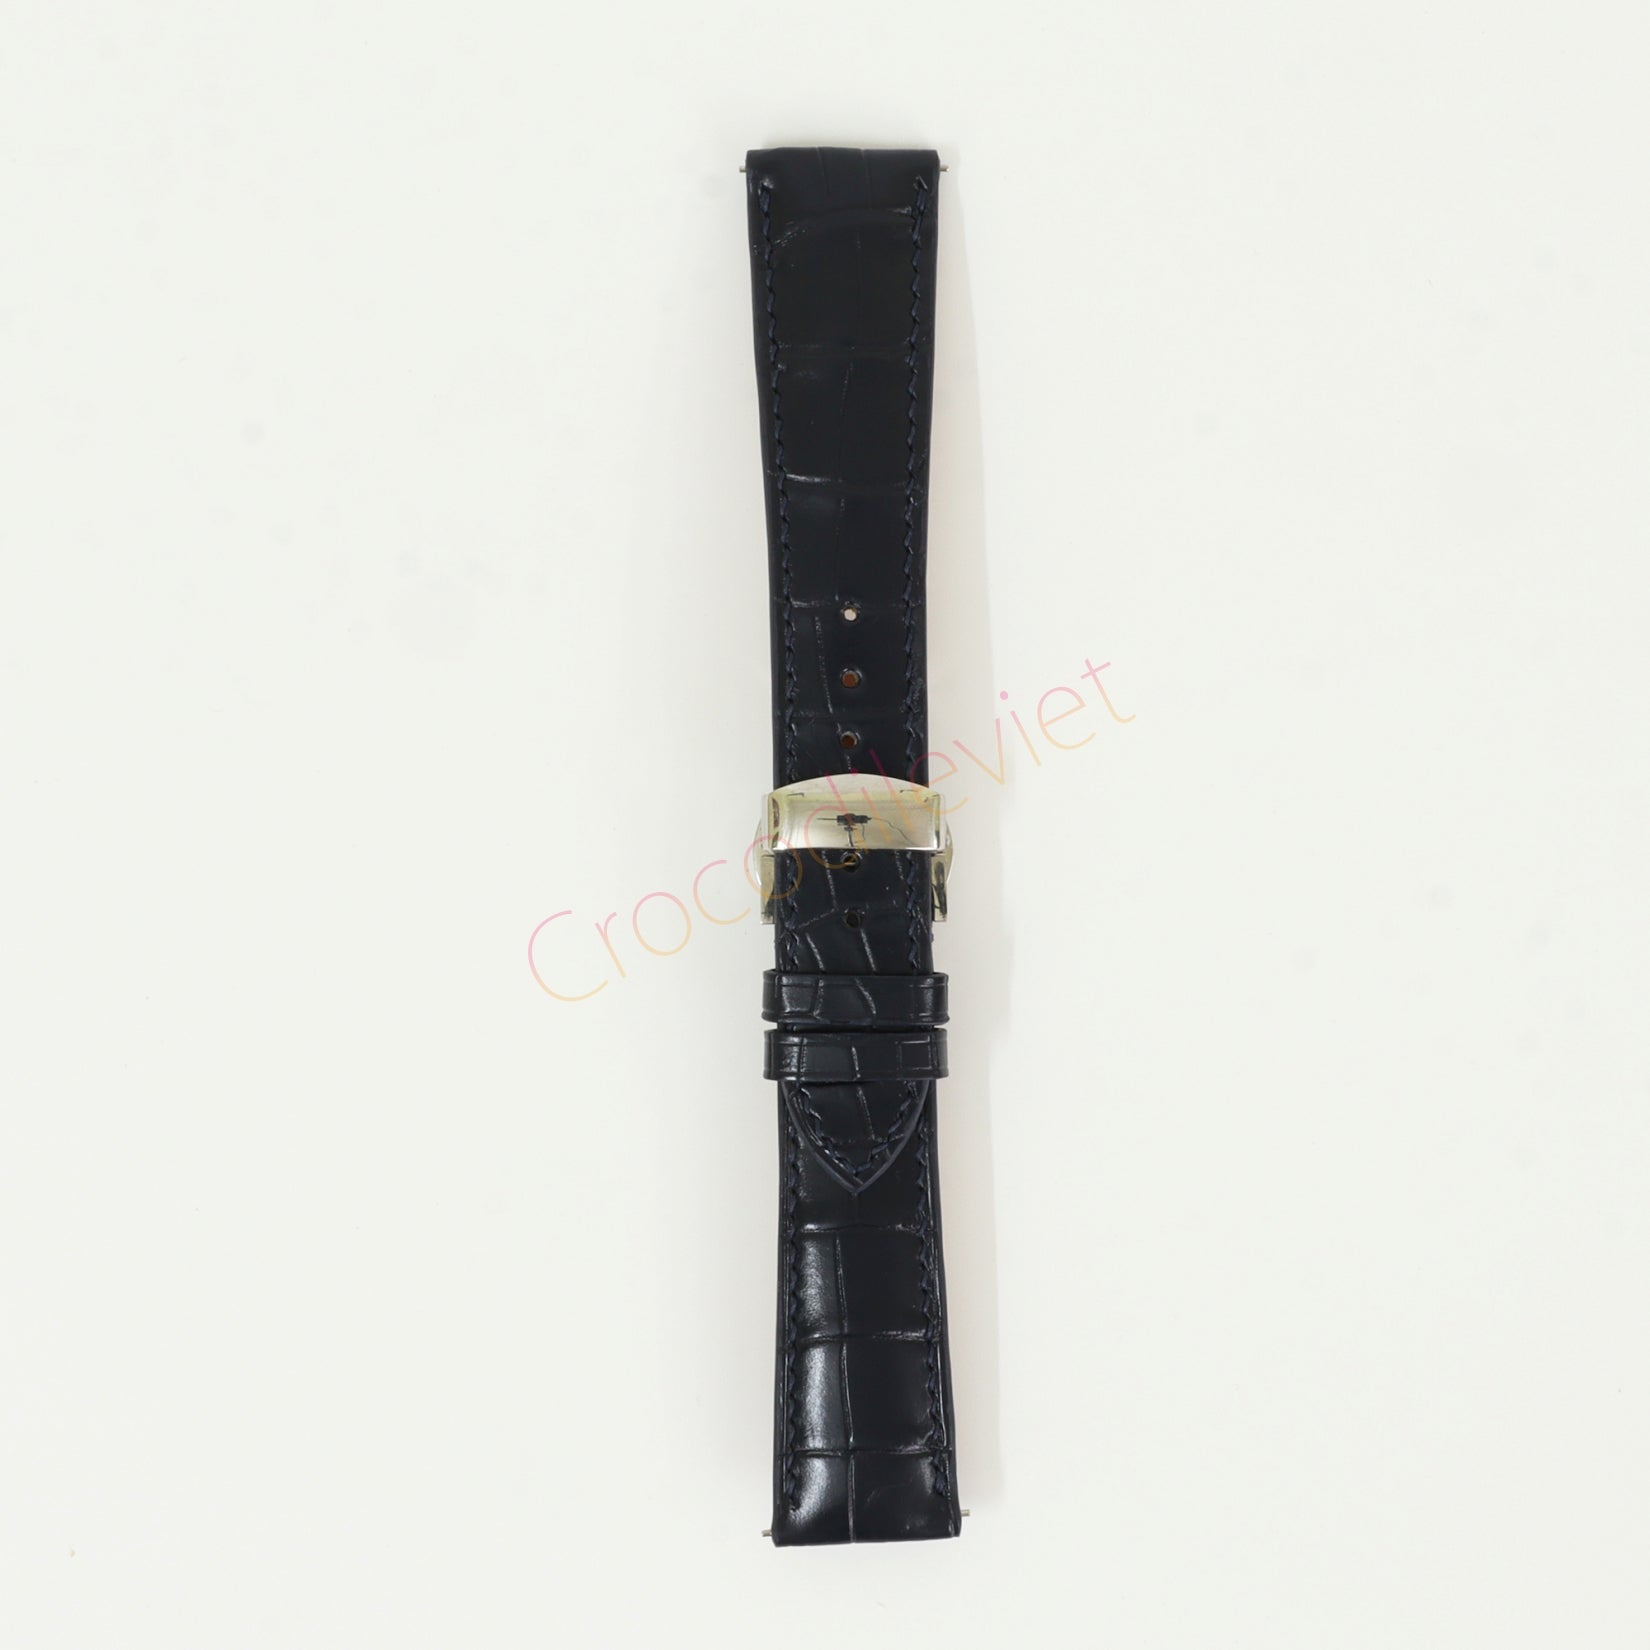 Genuine Alligator Leather Watch Straps With Deployant Clasp, Leather Watch Bands Quick Release Pins, Handmade Leather Watch Strap